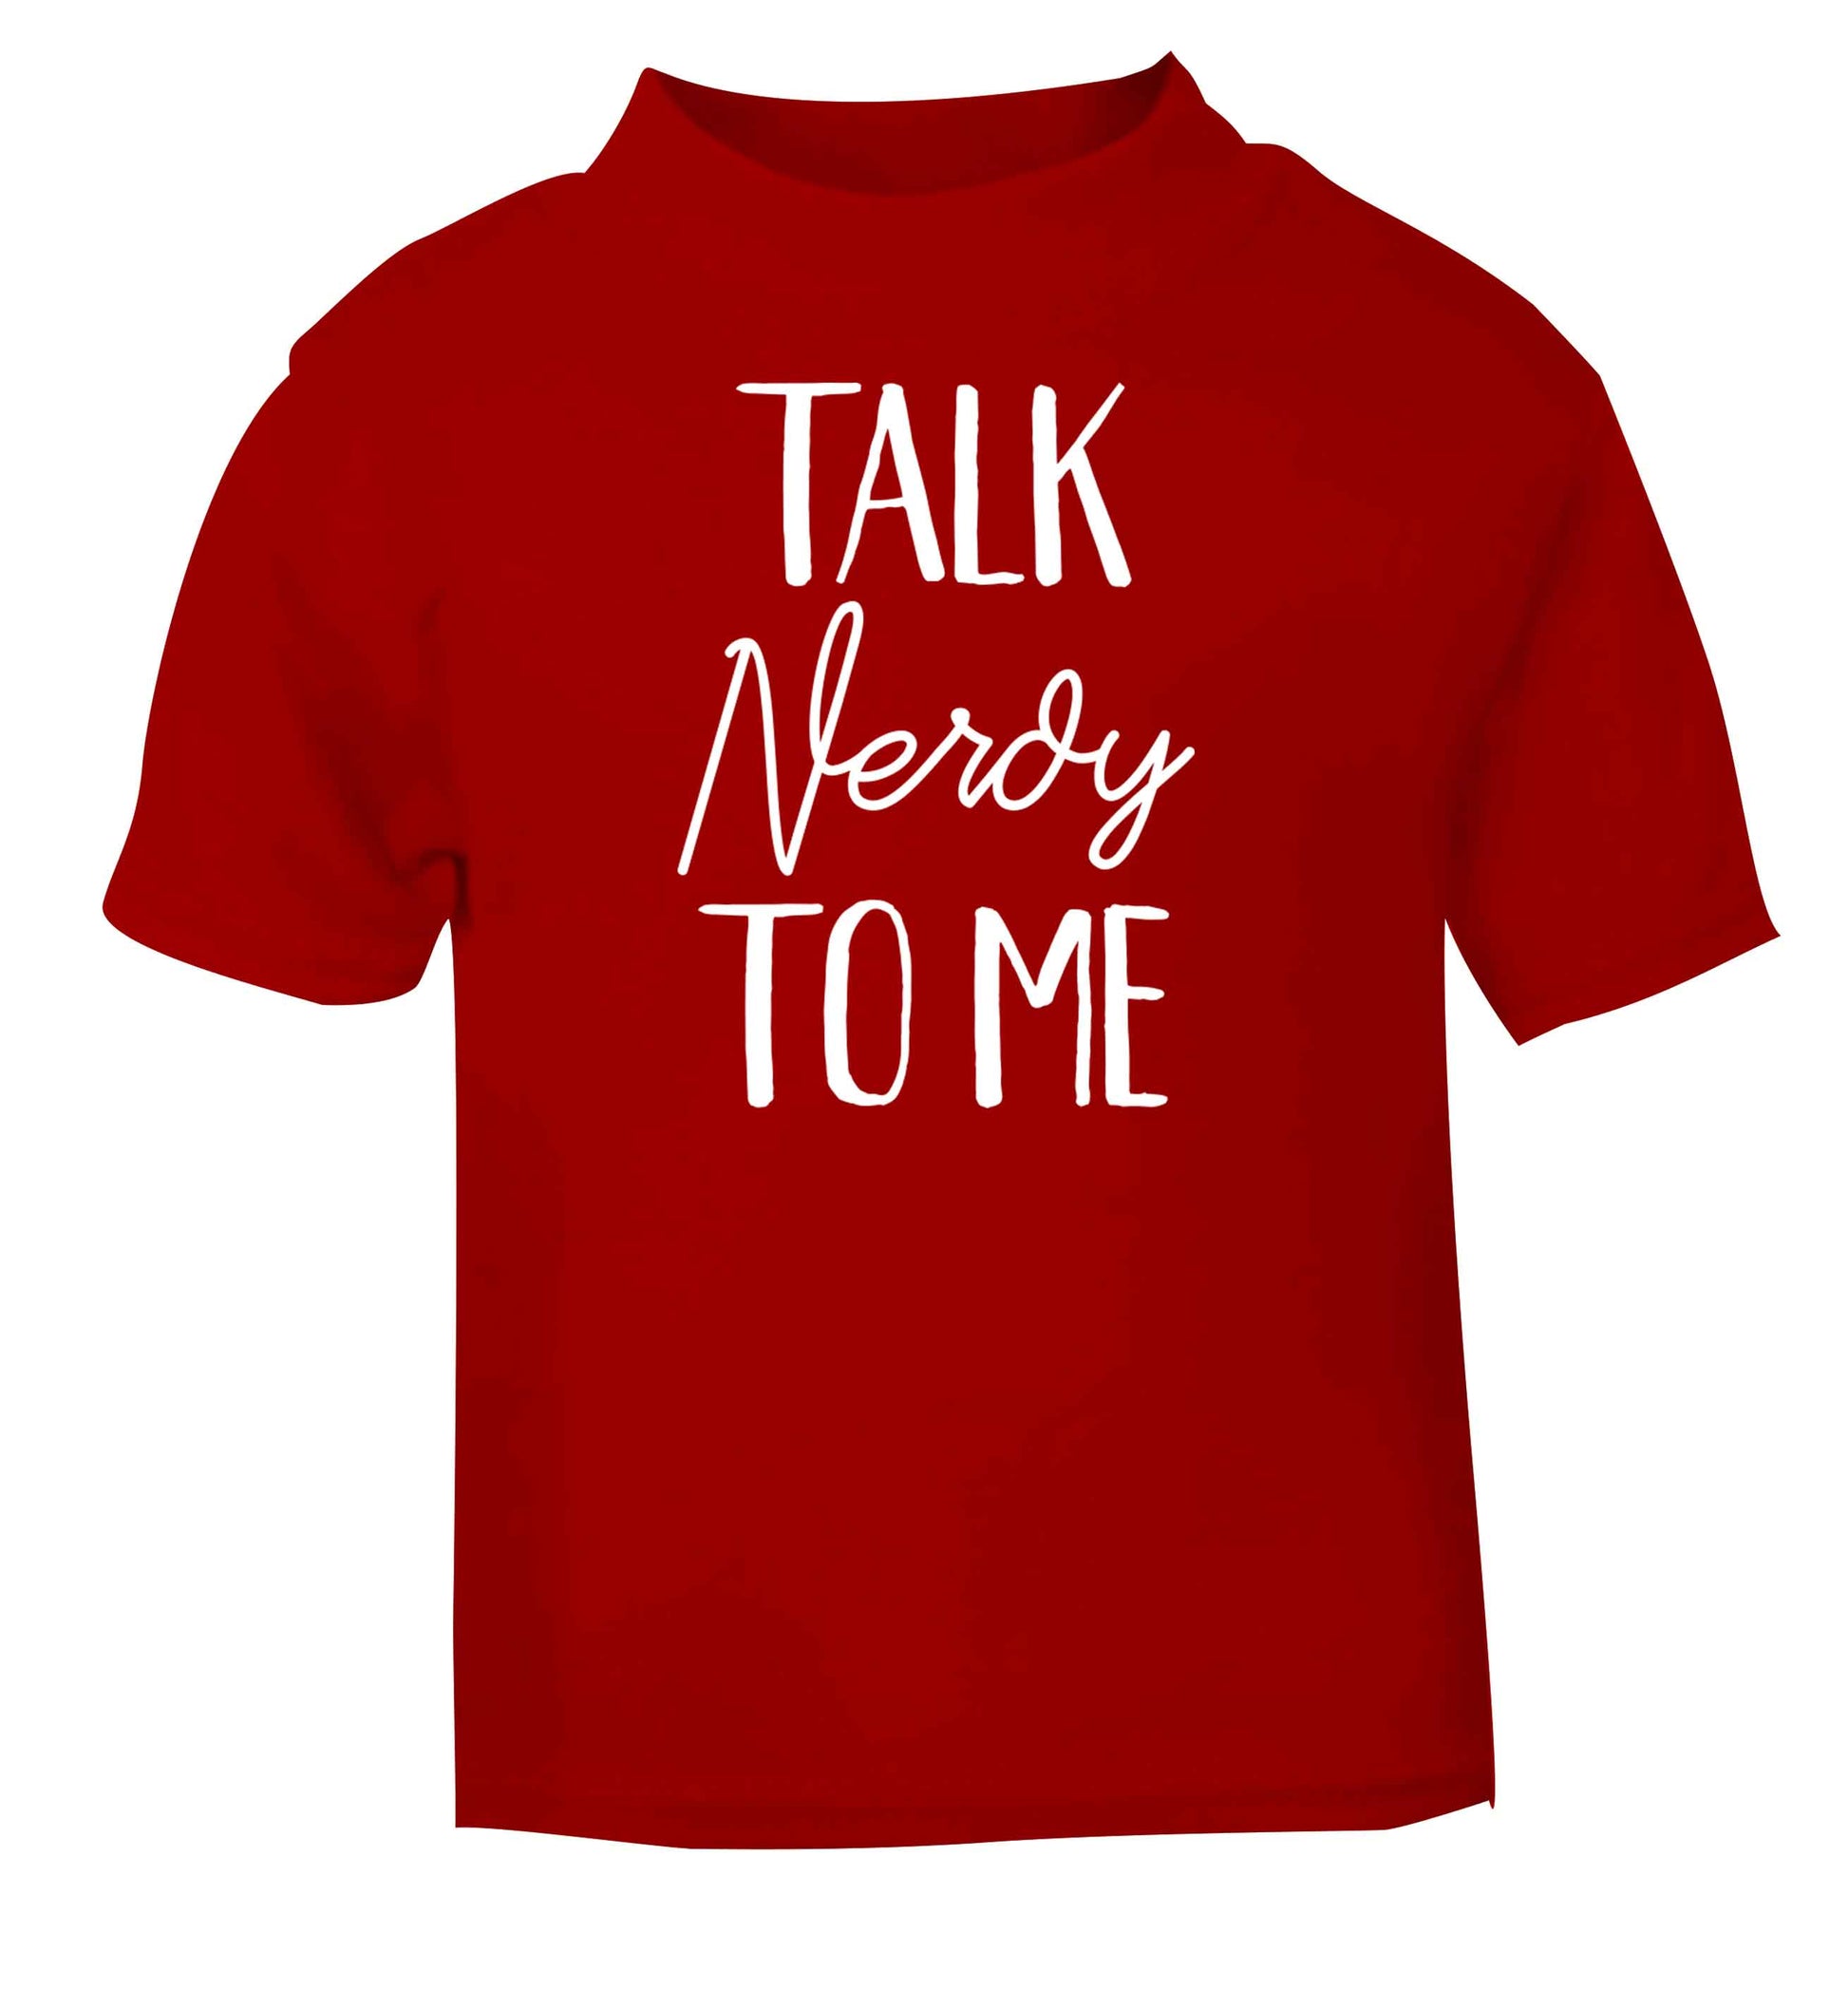 Talk nerdy to me red baby toddler Tshirt 2 Years